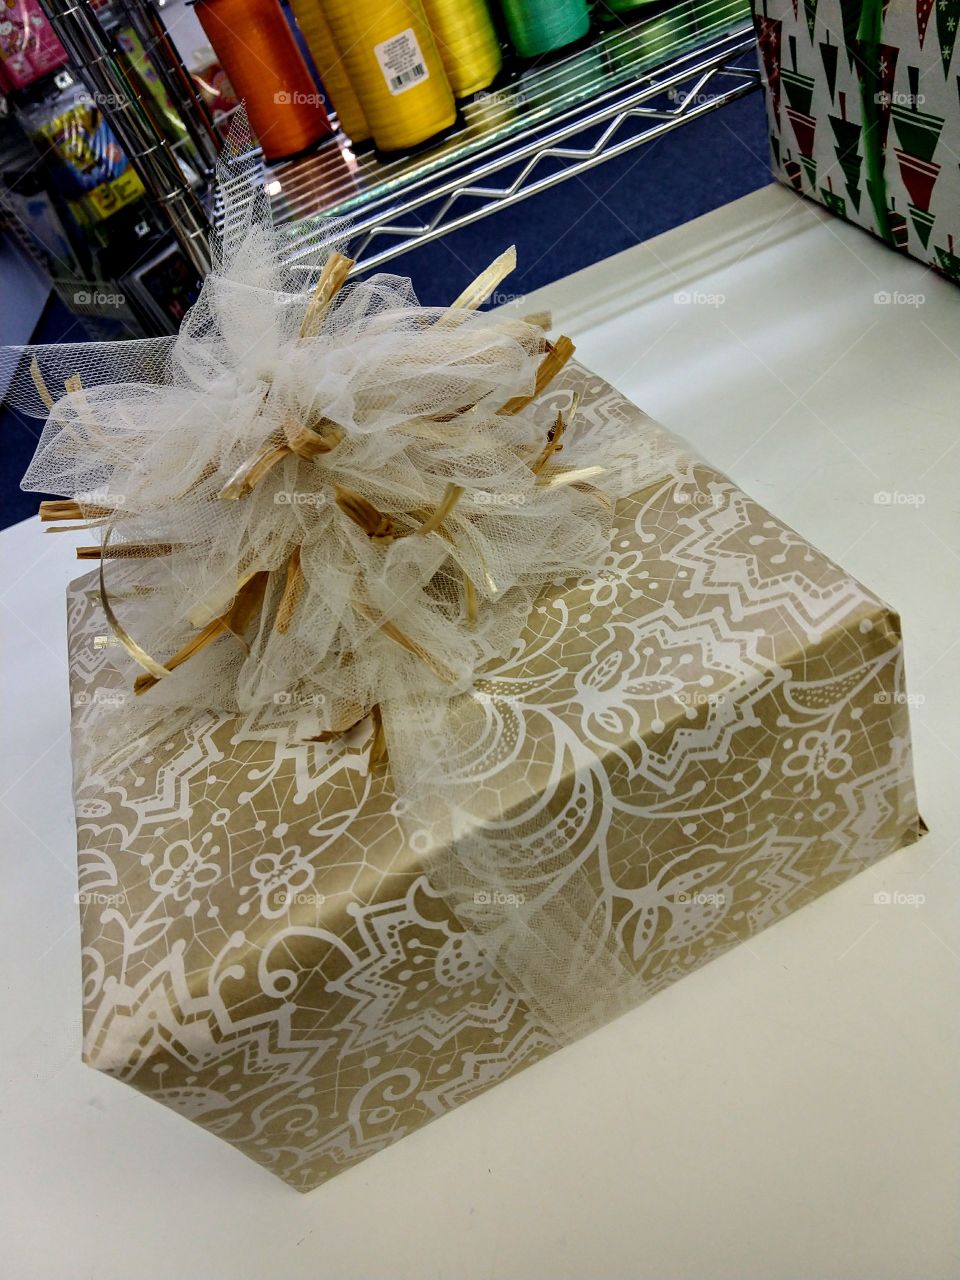 handwrapped gift done in a beige and white lace type wrapping paper with a tulle and raphia bow